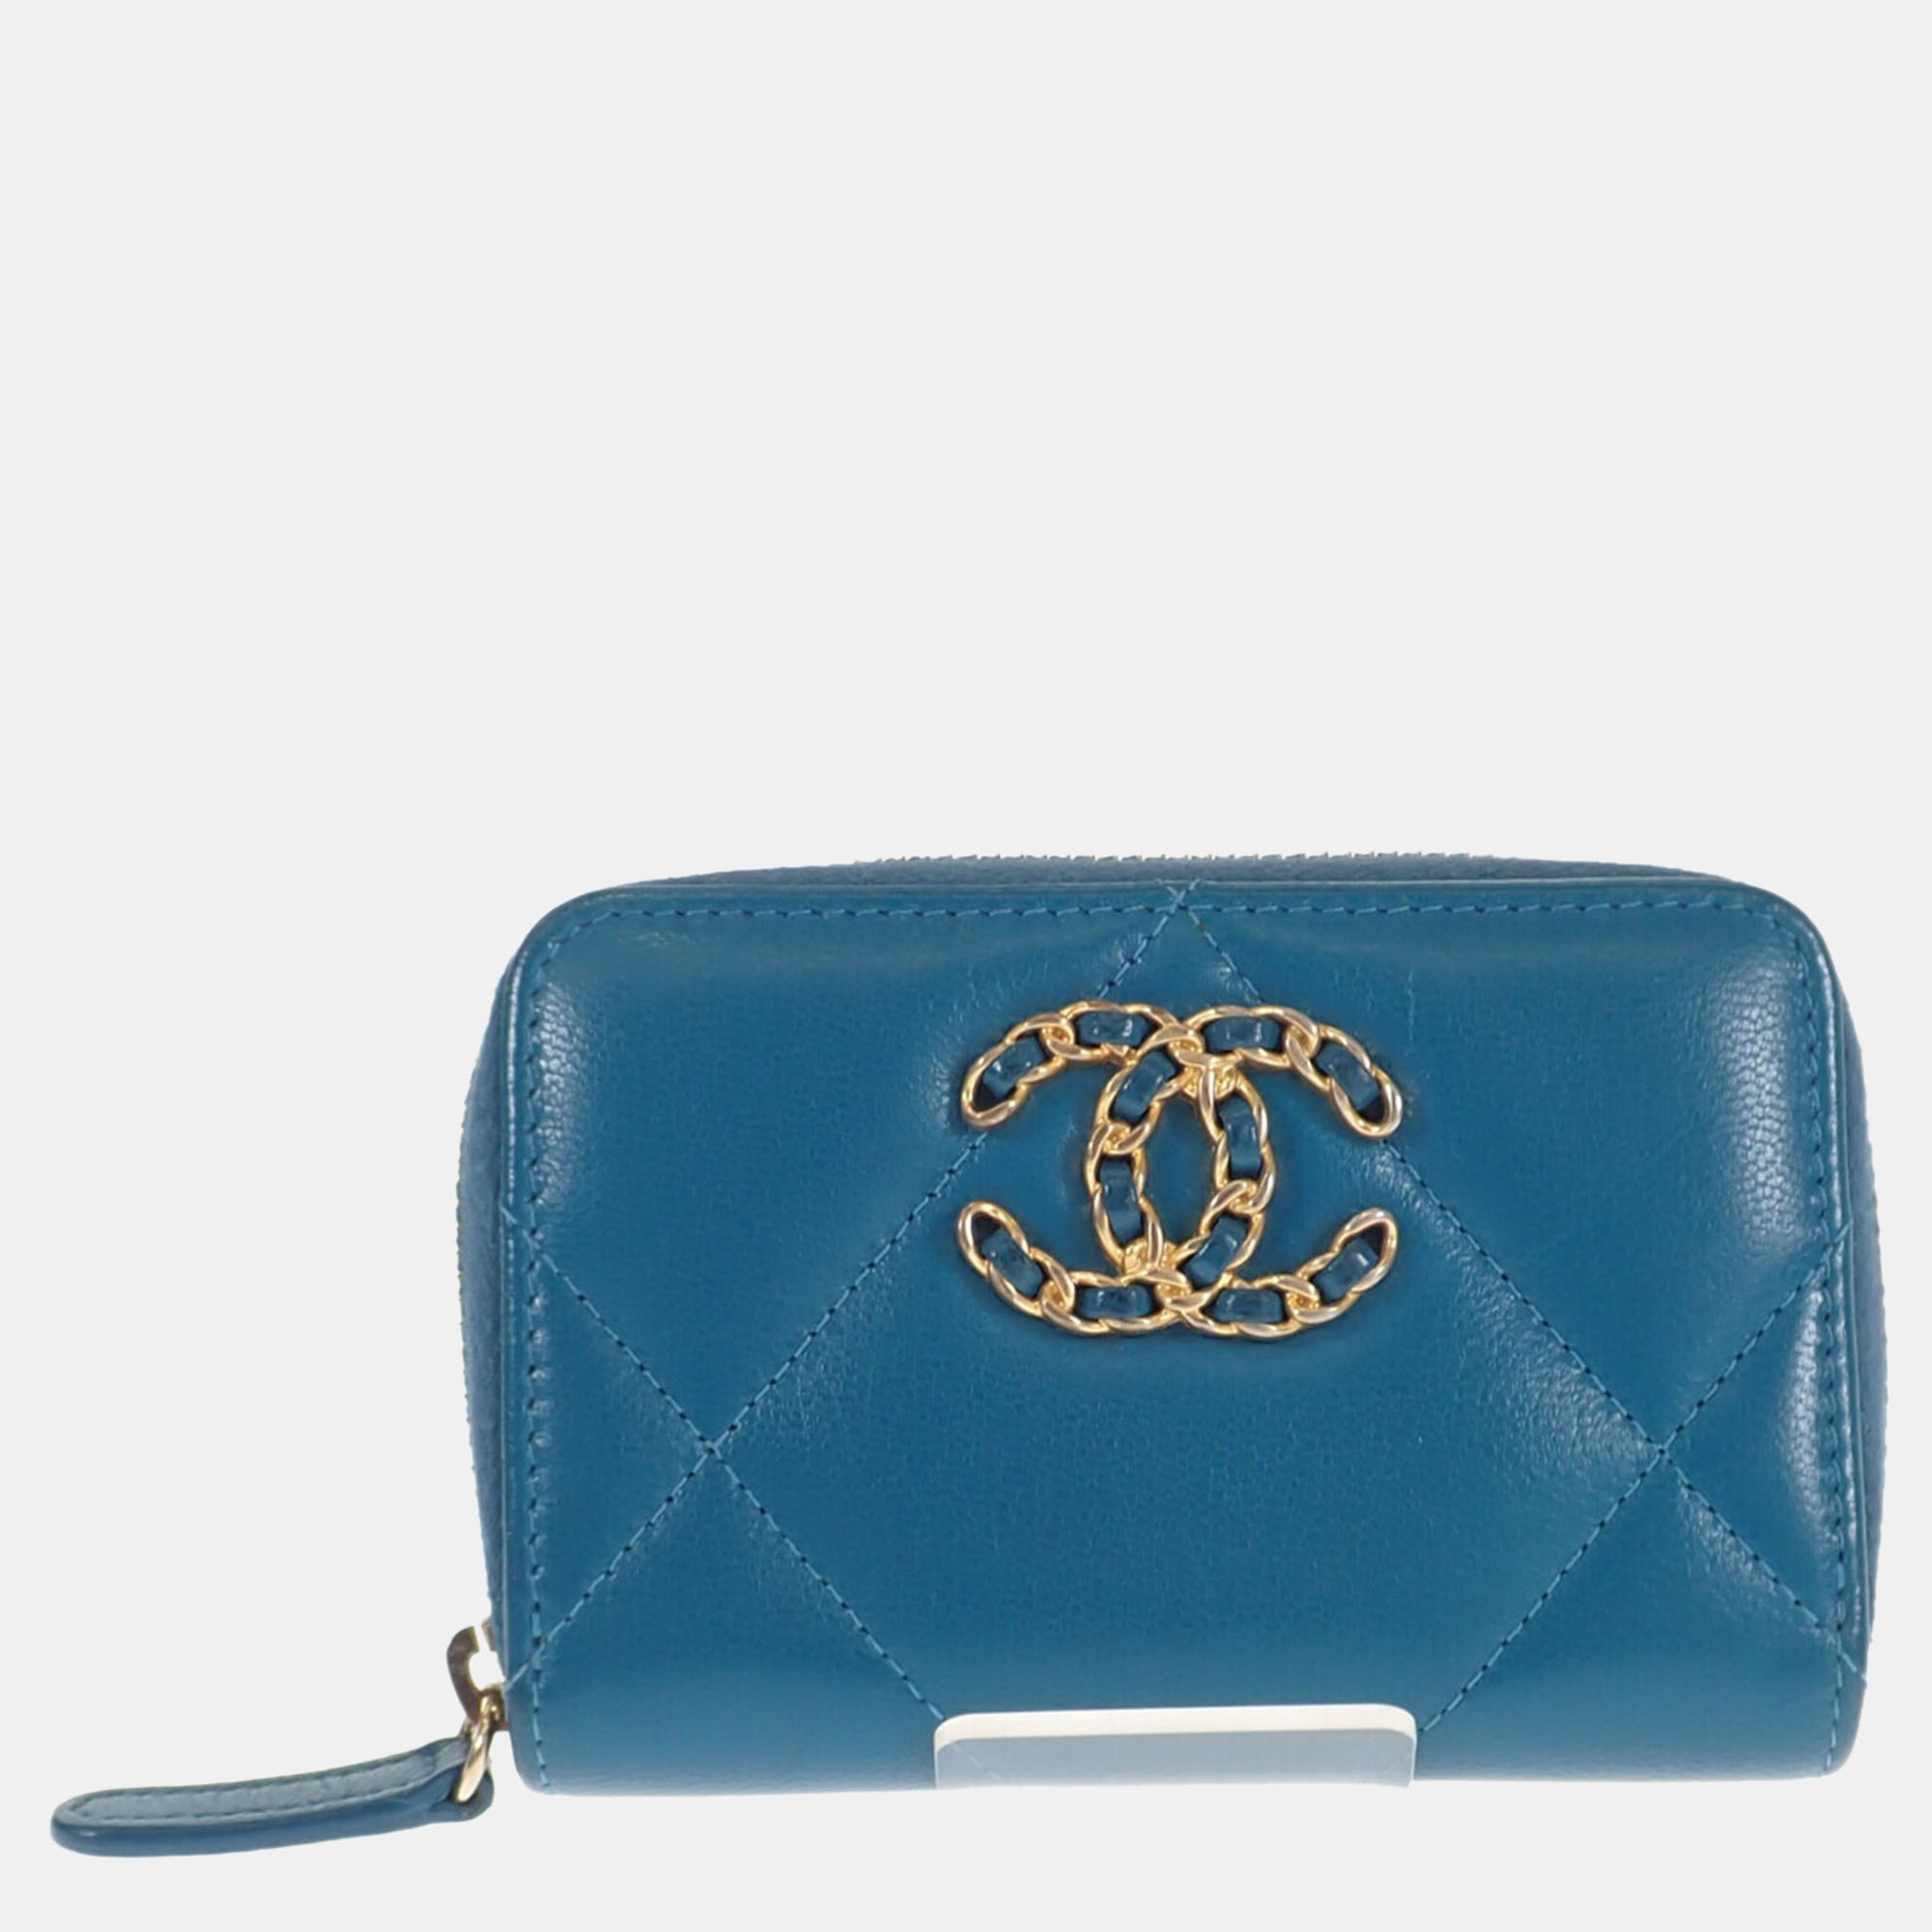 Chanel blue quilted leather 19 cc zip coin purse